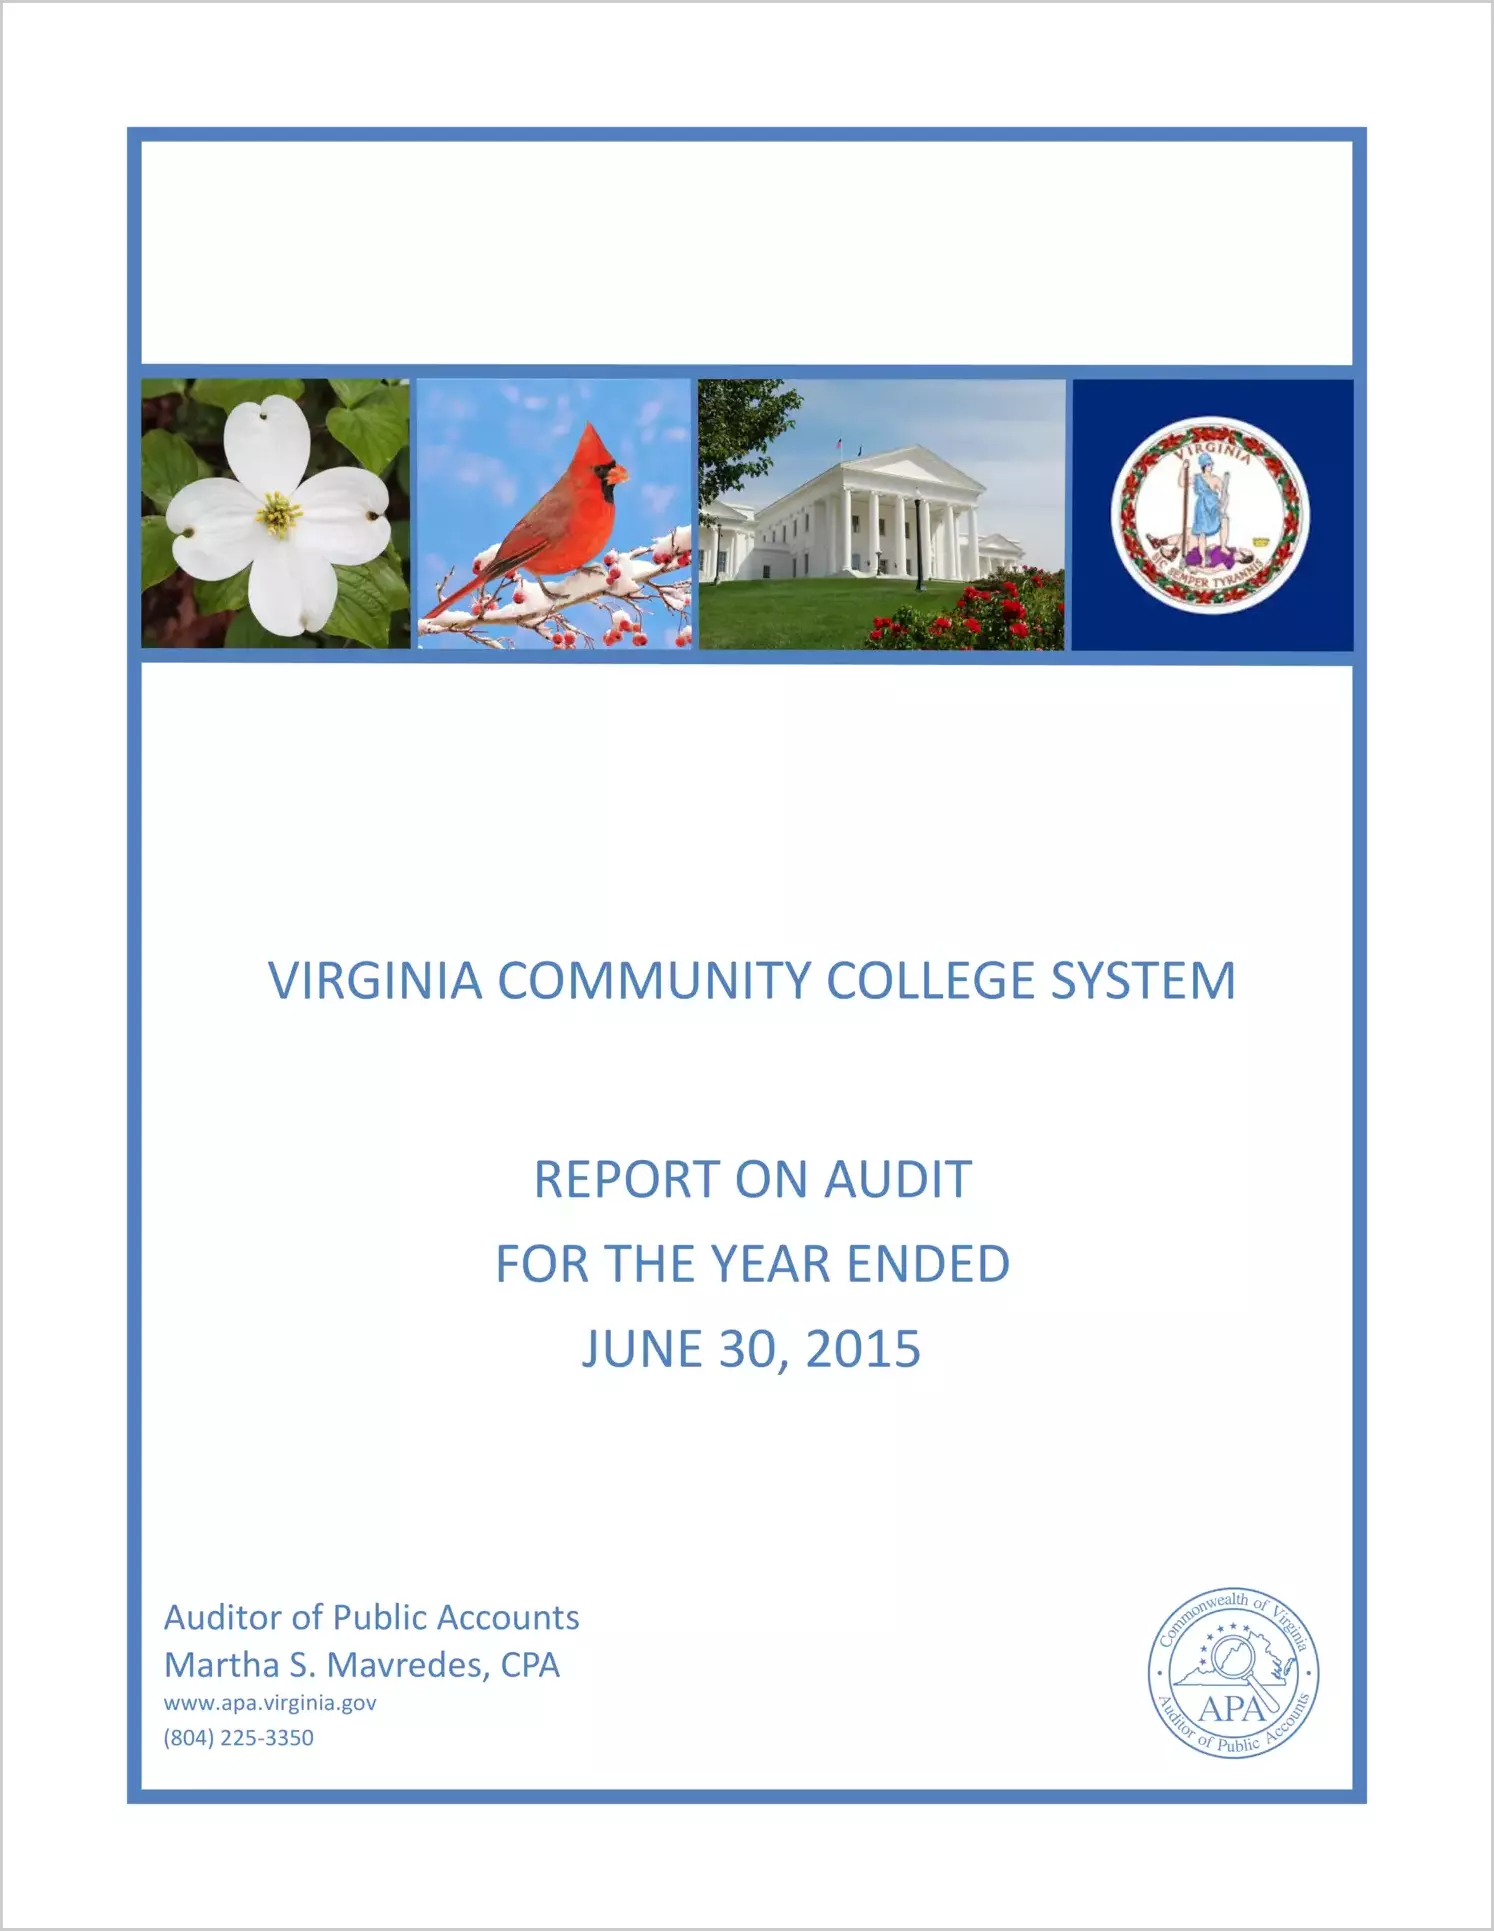 Virginia Community College System - report on audit for the year ended June 30, 2015